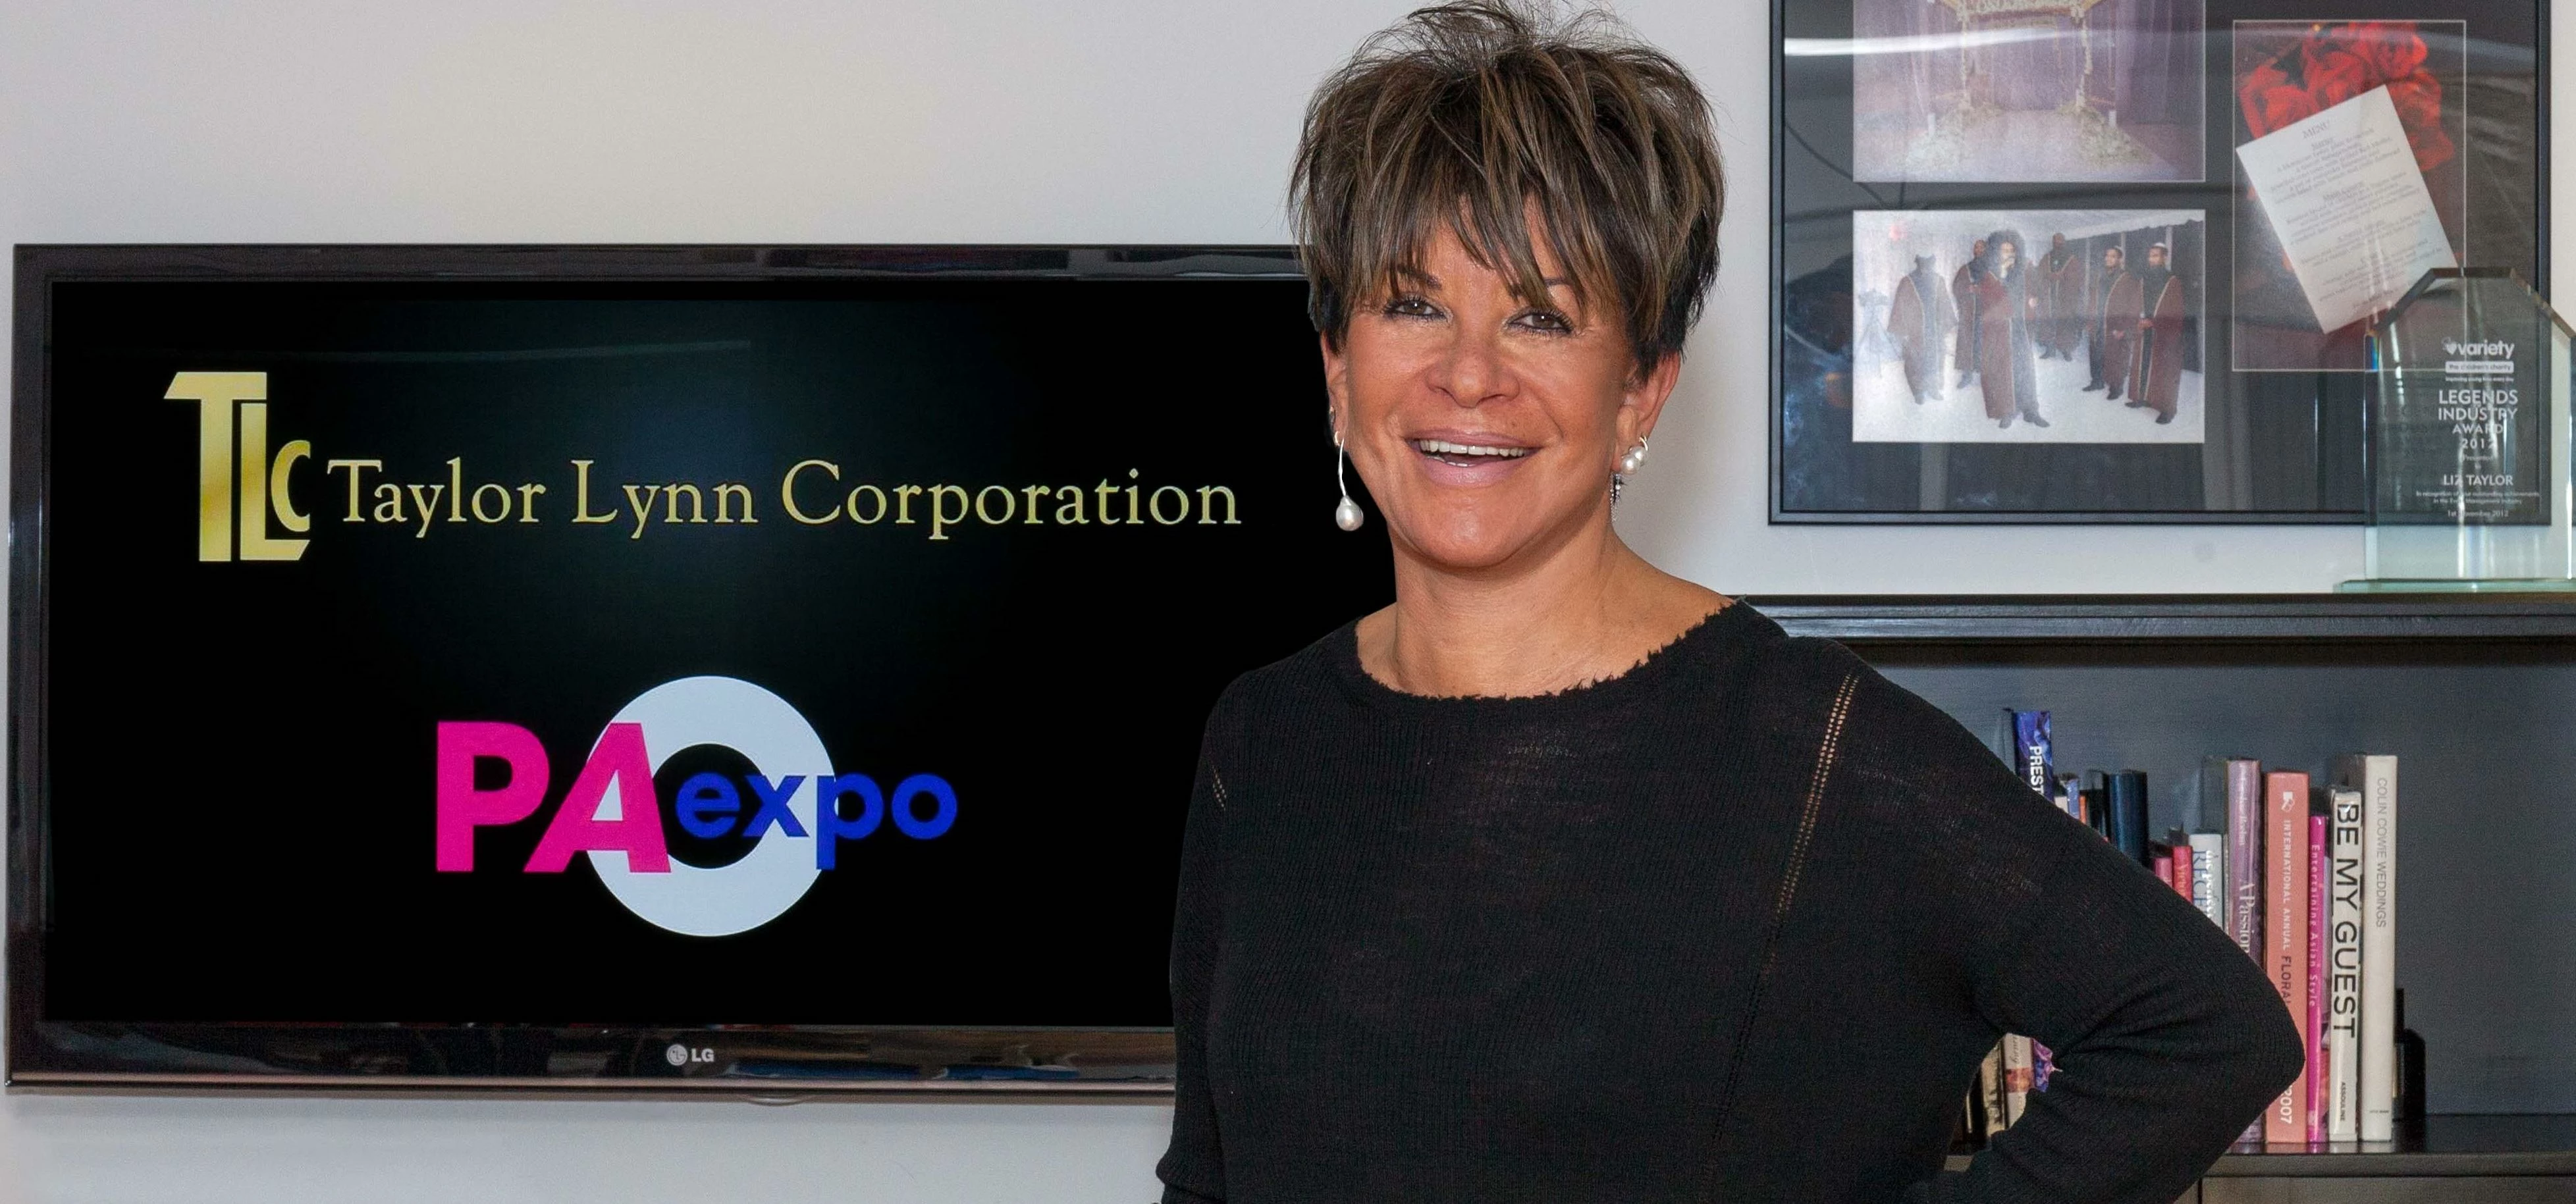 Liz Taylor of event company, the Taylor Lynn Corporation, Becomes A Sponsor of PA Expo 16